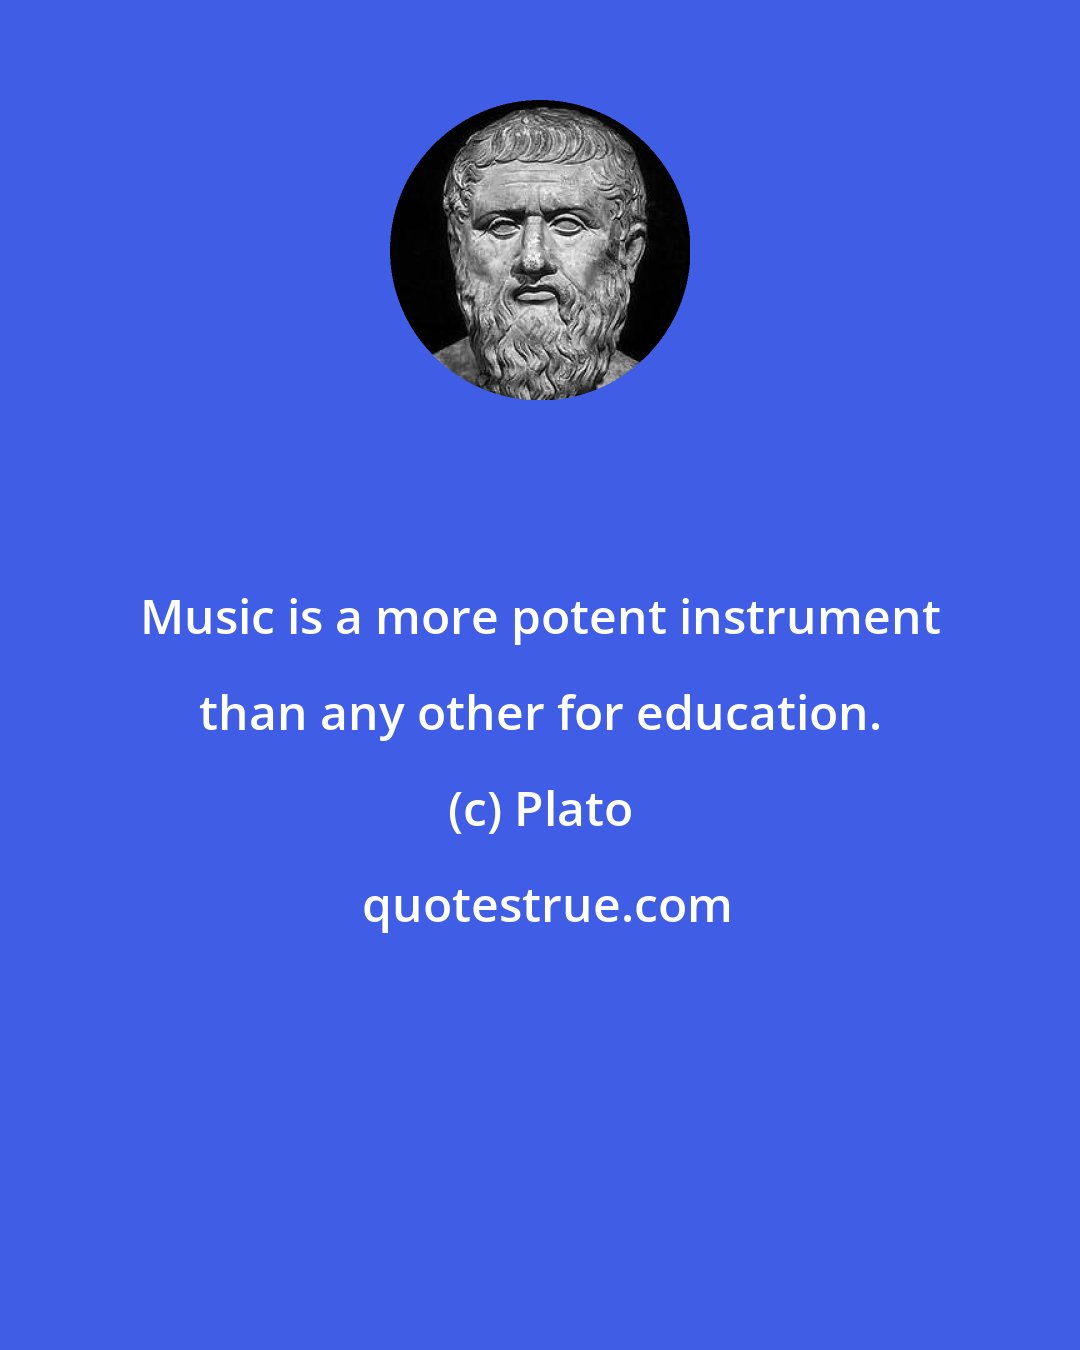 Plato: Music is a more potent instrument than any other for education.